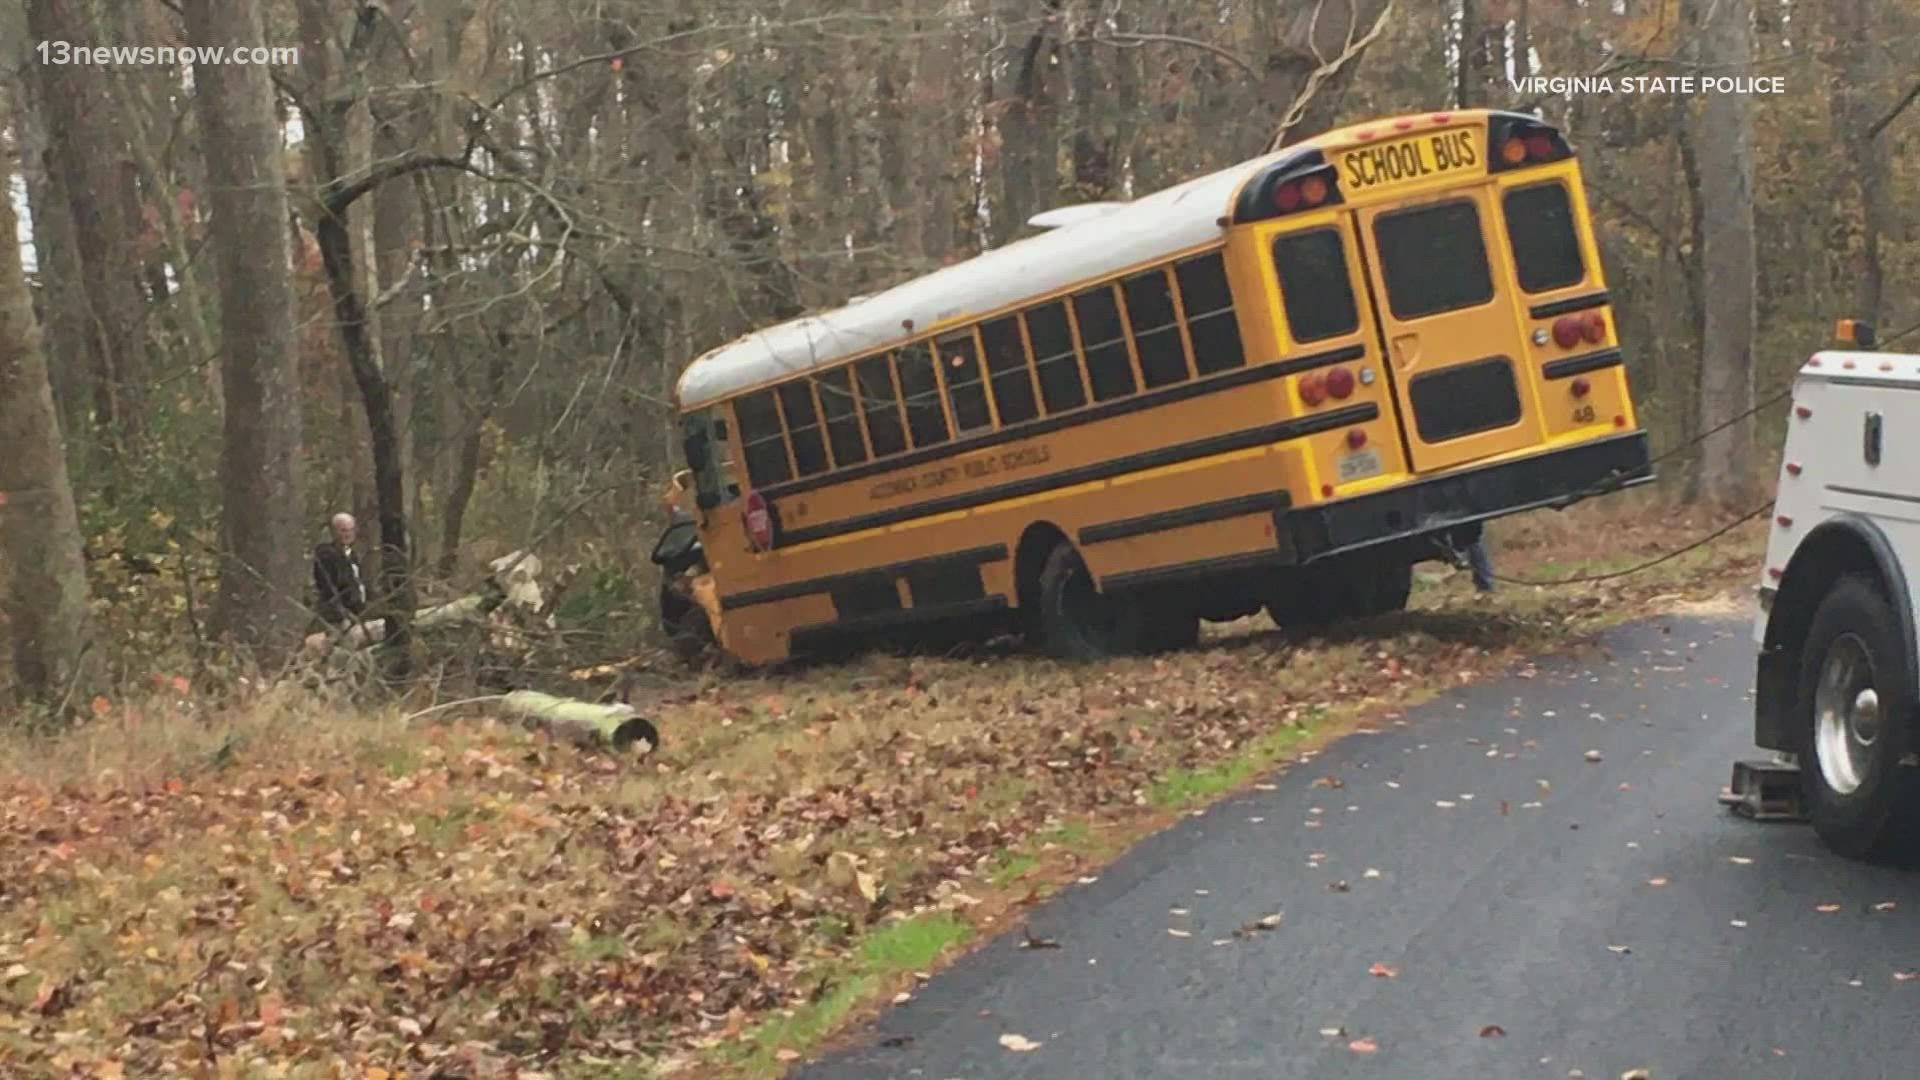 Doctors and nurses are treating more than a dozen children who were injured in a school bus crash in Accomack County this morning.